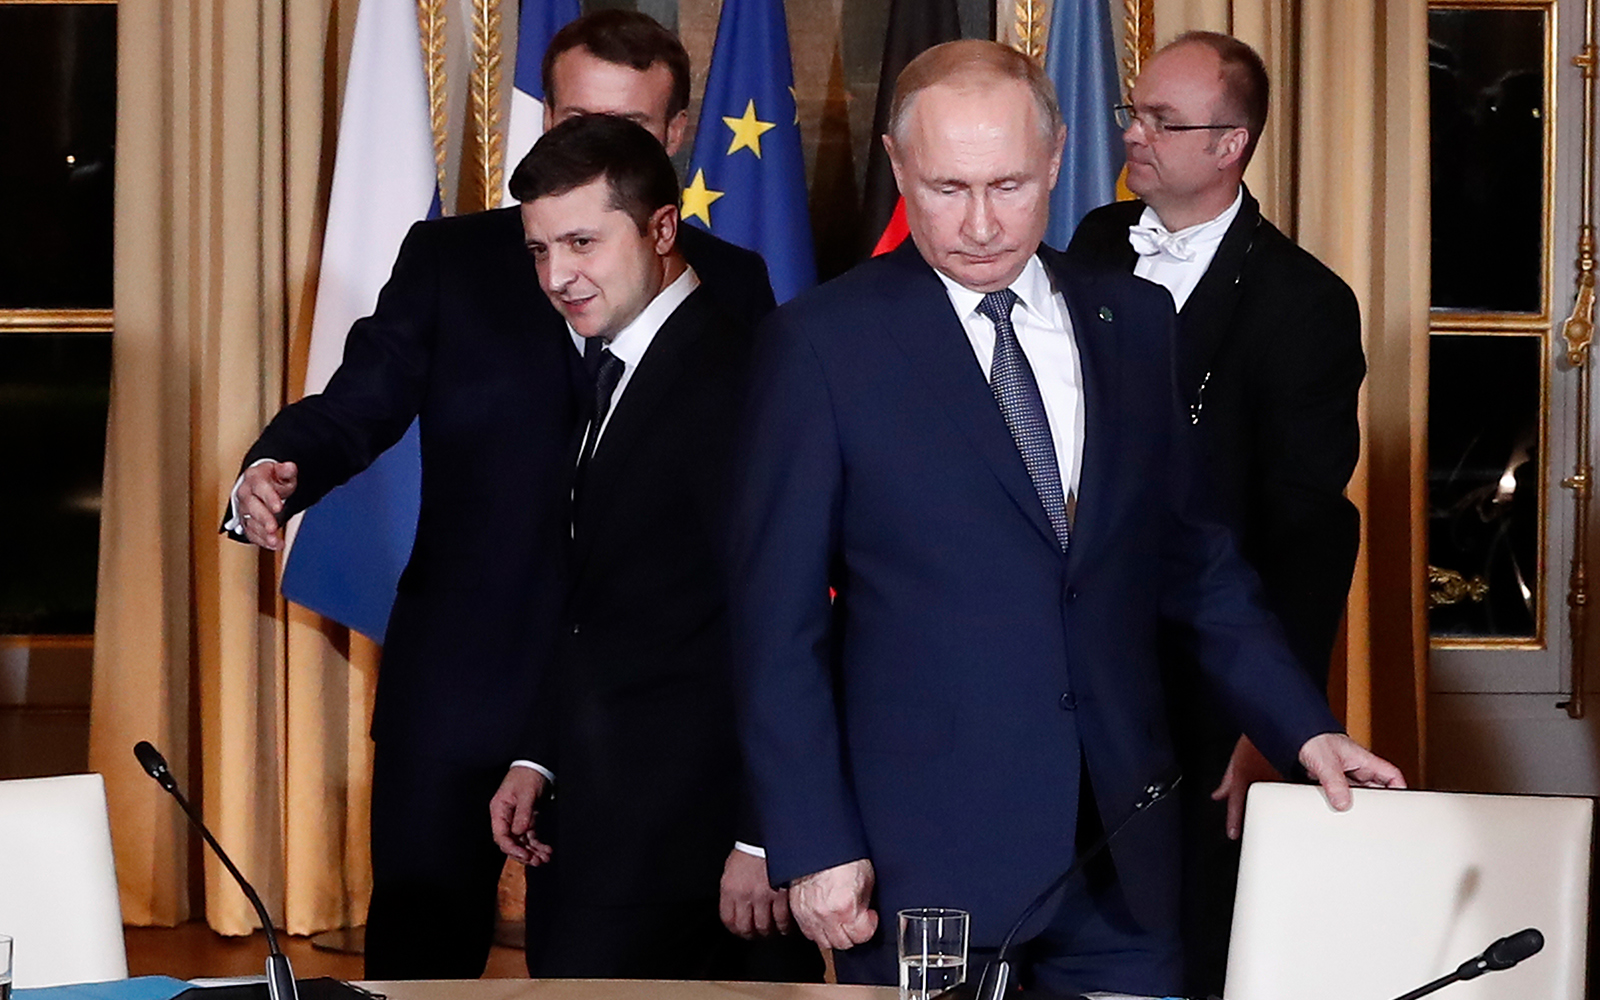 Russian President Vladimir Putin, right, and Ukrainian President Volodymyr Zelensky arrive for a working session at the Elysee Palace, Dec. 9, 2019 in Paris. (Ian Langsdon/Pool via AP)